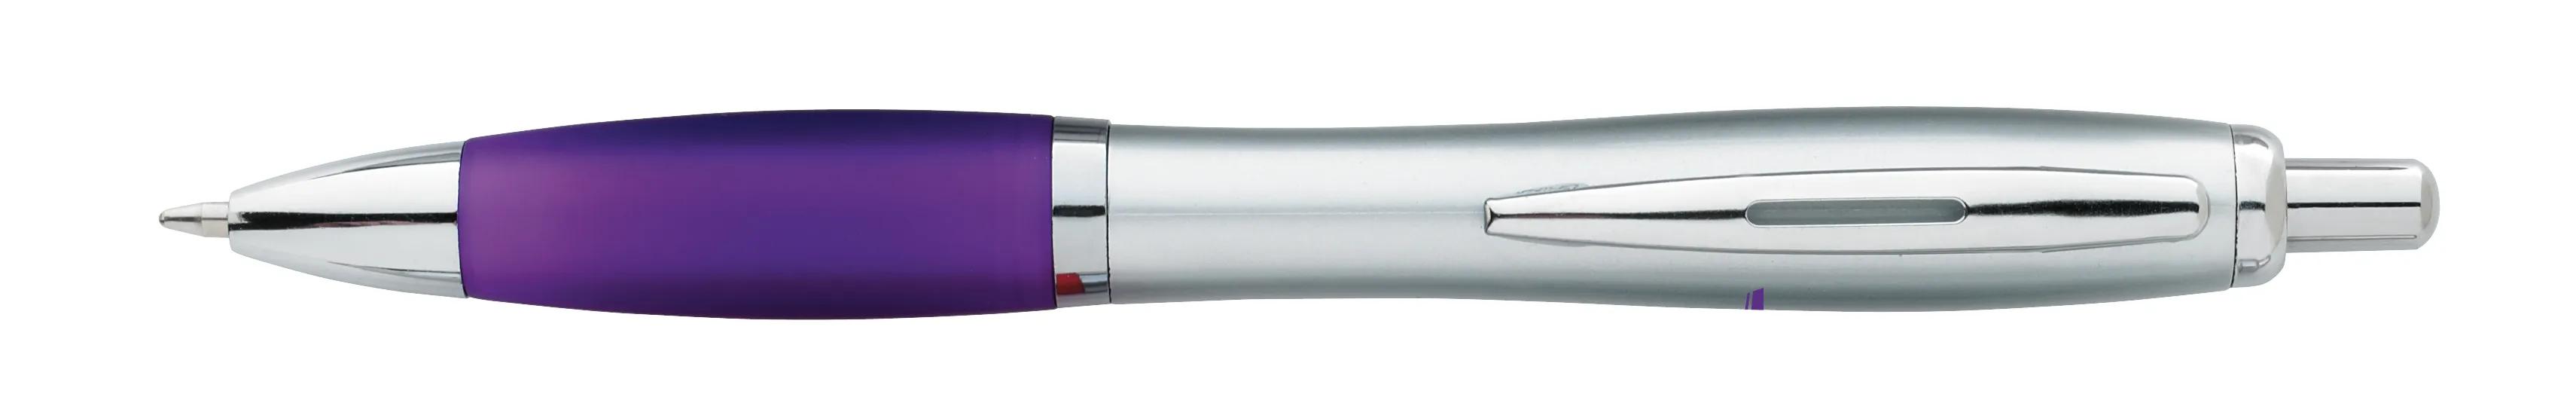 Ion Silver Pen 34 of 43